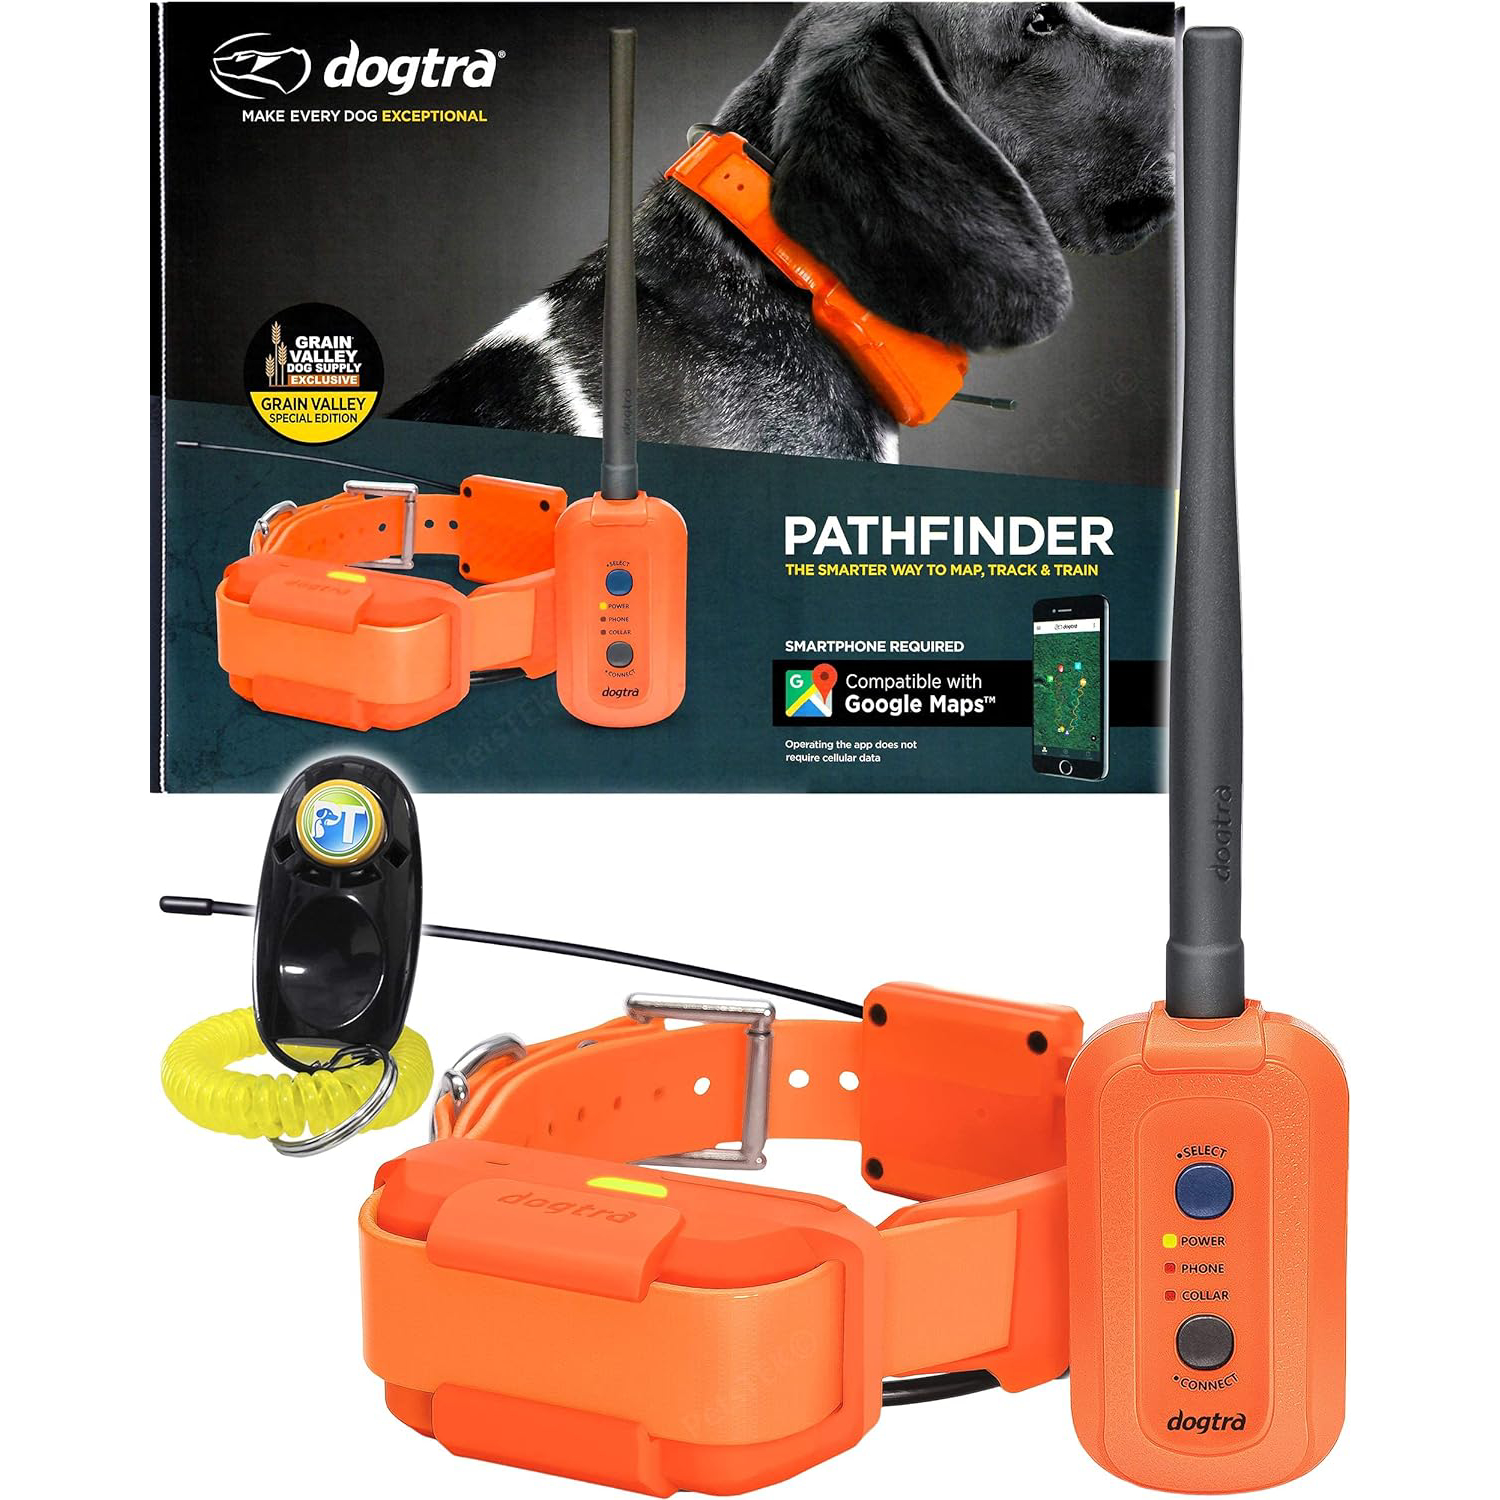 Dogtra Pathfinder Dog Remote Training and GPS Tracking Collar 